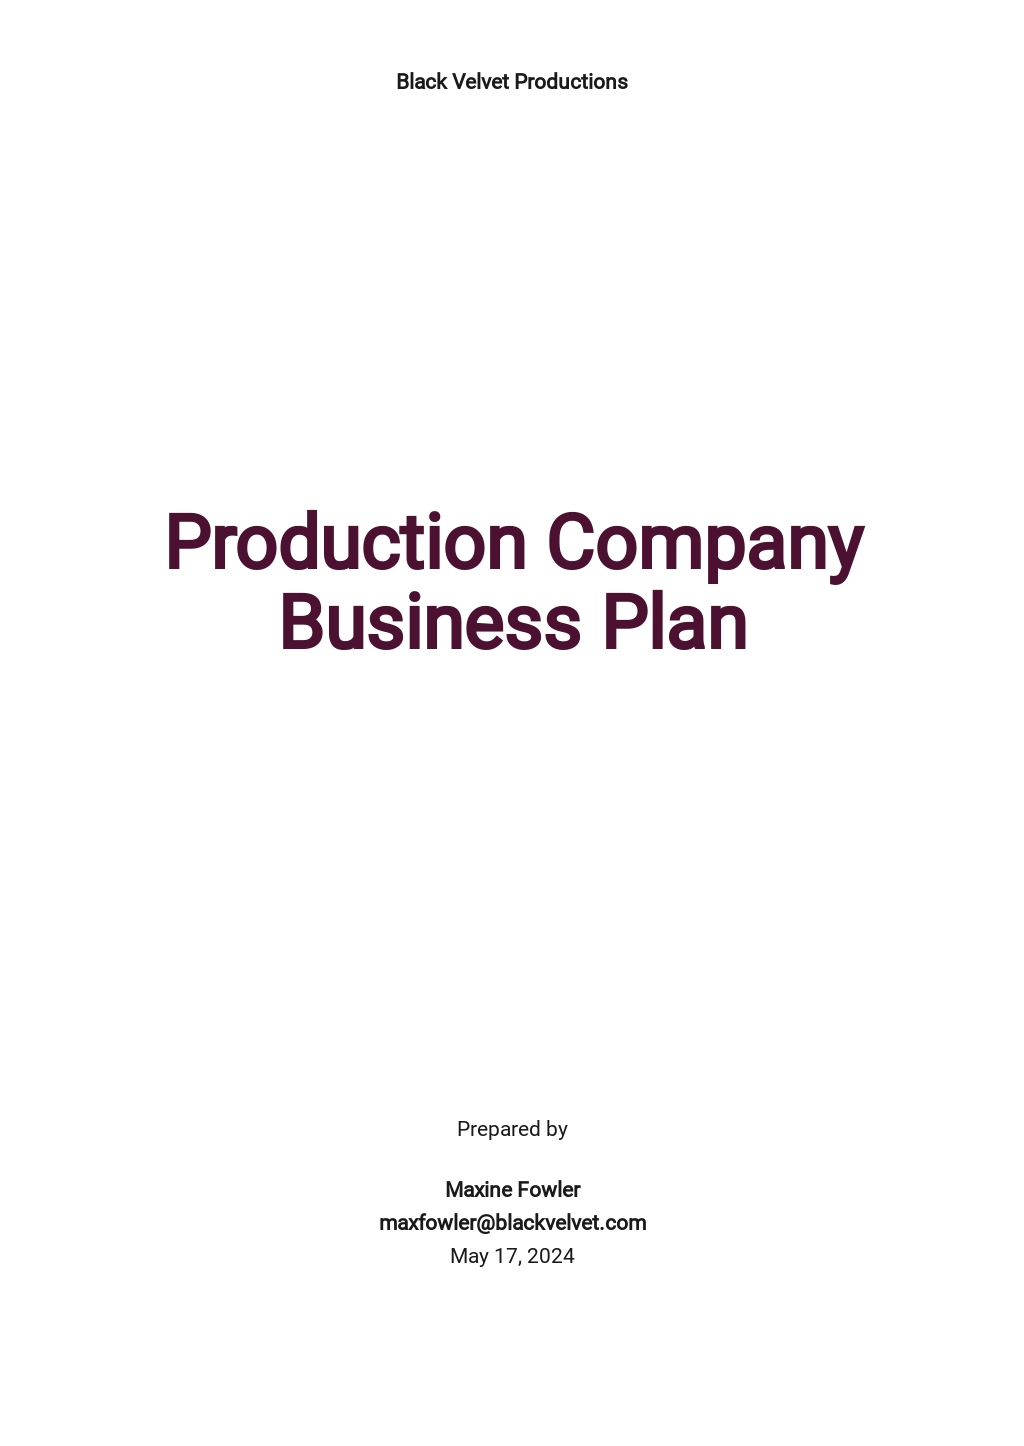 video production company business plan